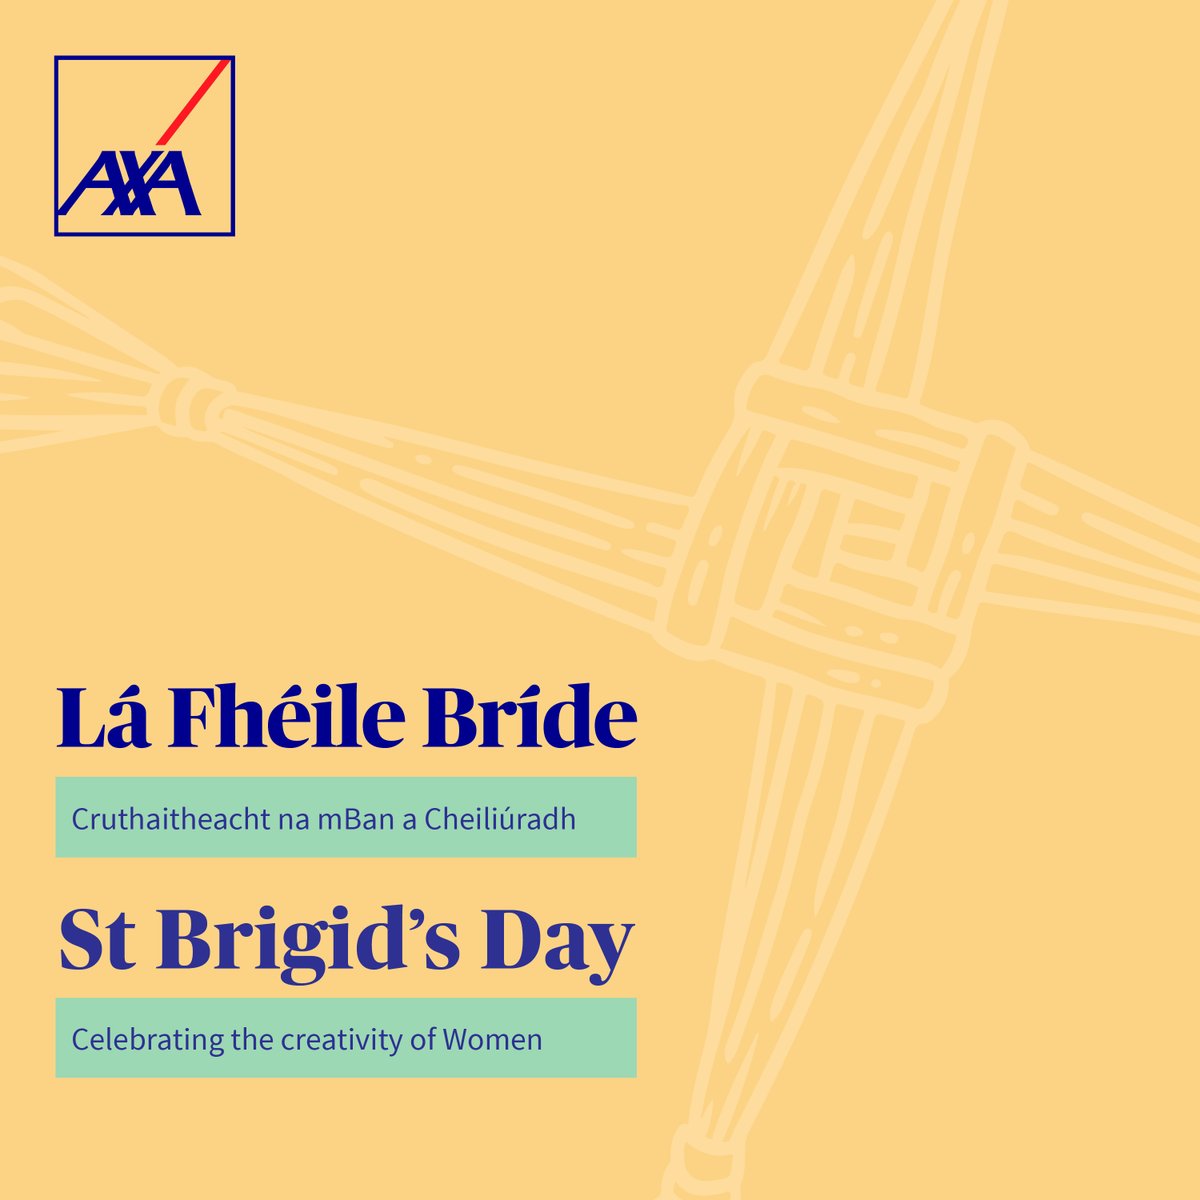 Lá Fhéile Bríde– St Brigid’s Day Celebrating the creativity of Women, and the beginning of Spring. #KnowYouCan